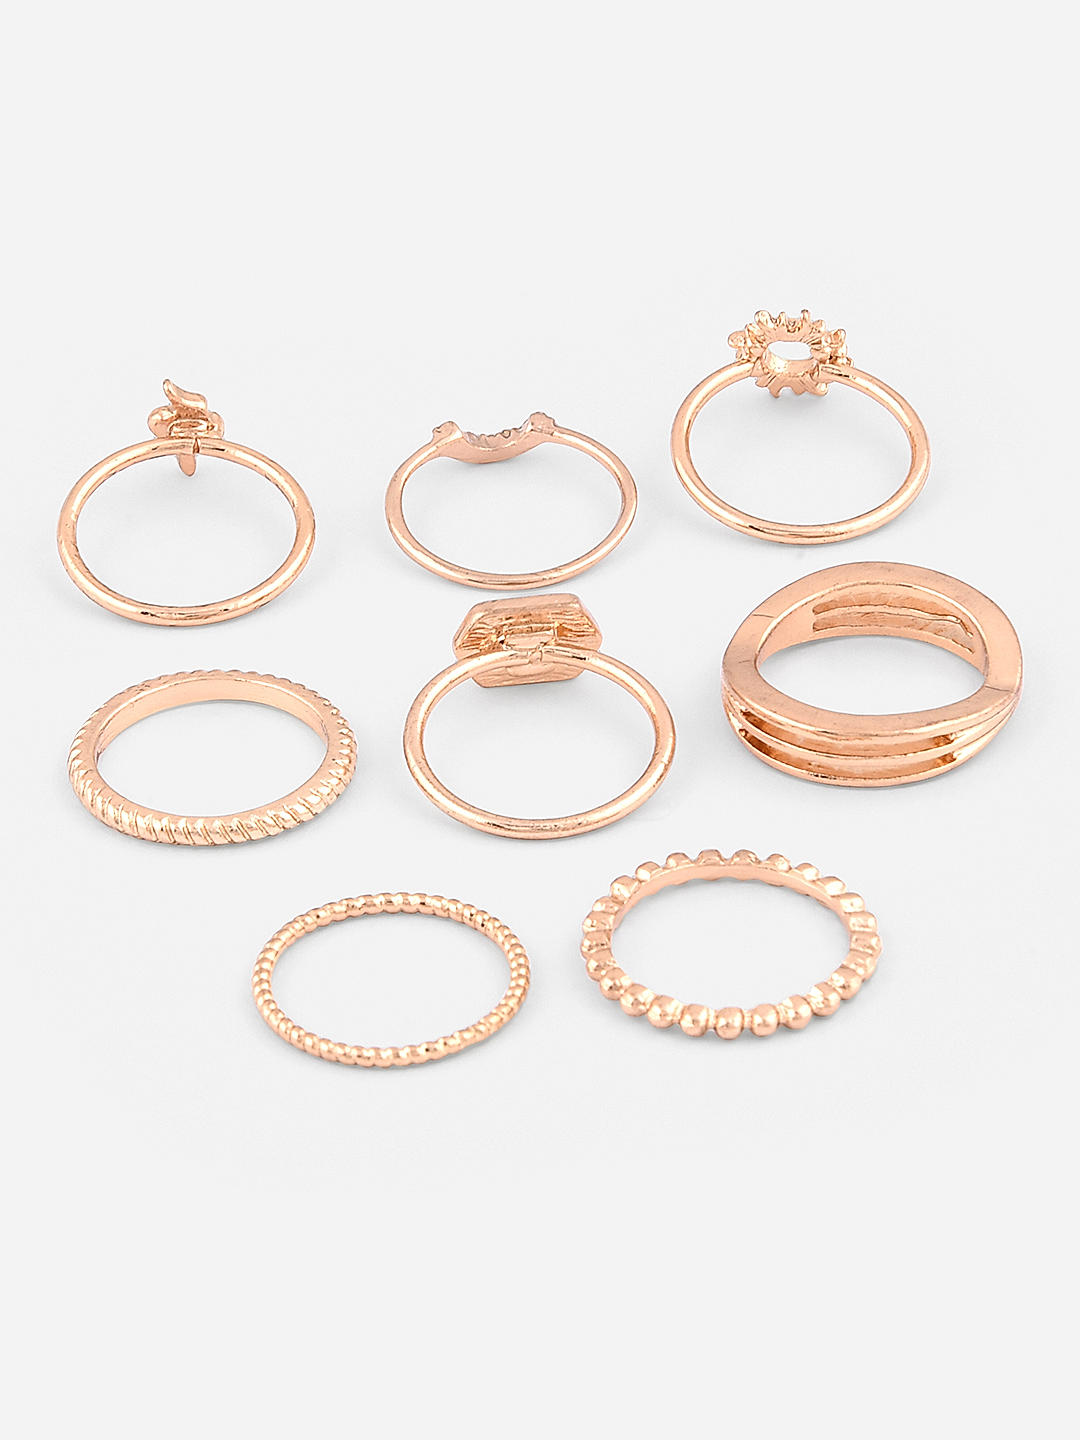 Pearls Simple Jewelry | Minimal Rings Women | Pearl Jewelry Ring | Gold  Fashion Rings - Rings - Aliexpress